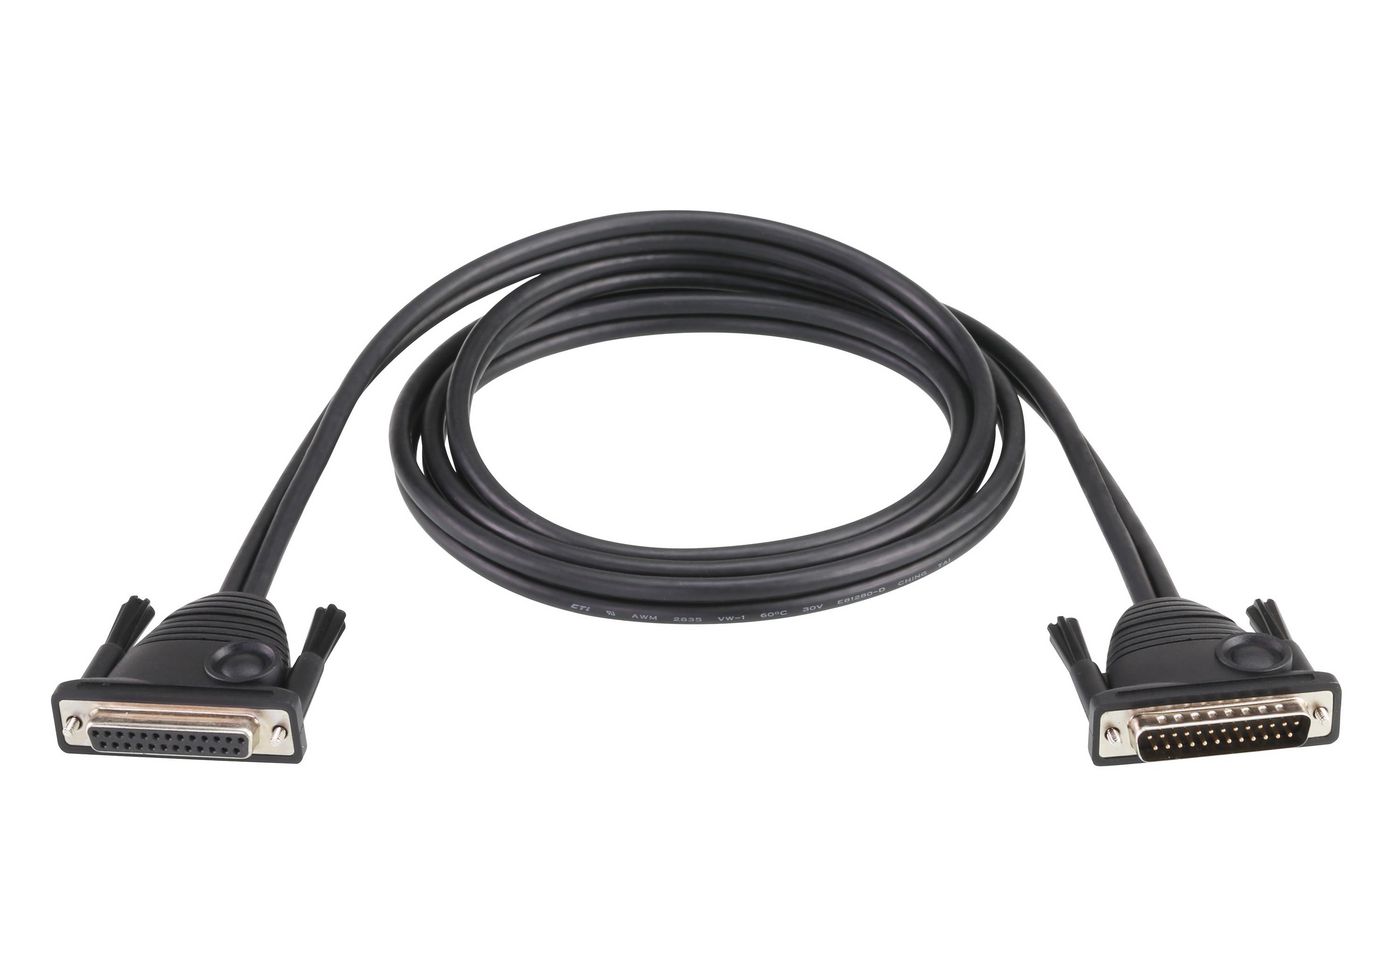 Aten 2L-2701 Daisy Cable for Cat 5 KVM 